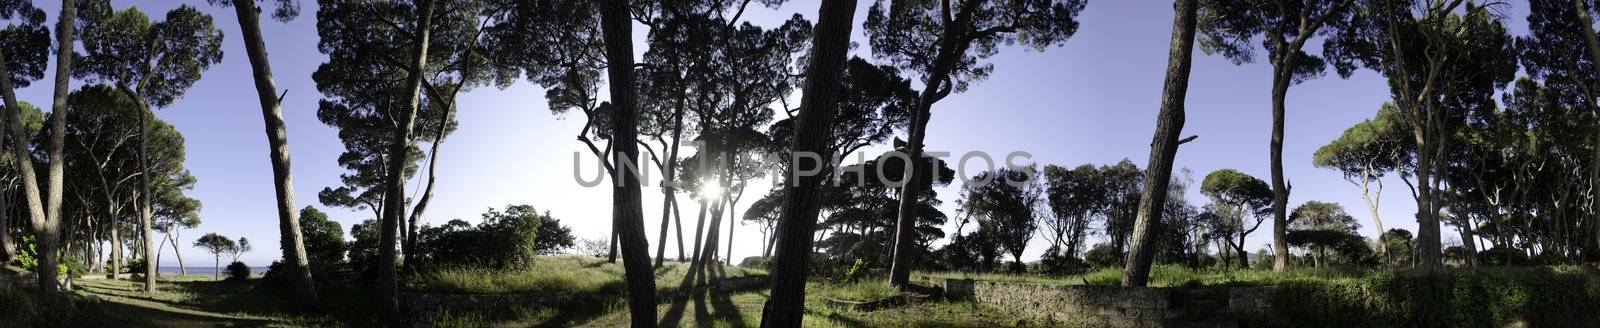 Pines in a Tuscan Pinewood near Follonica by jovannig